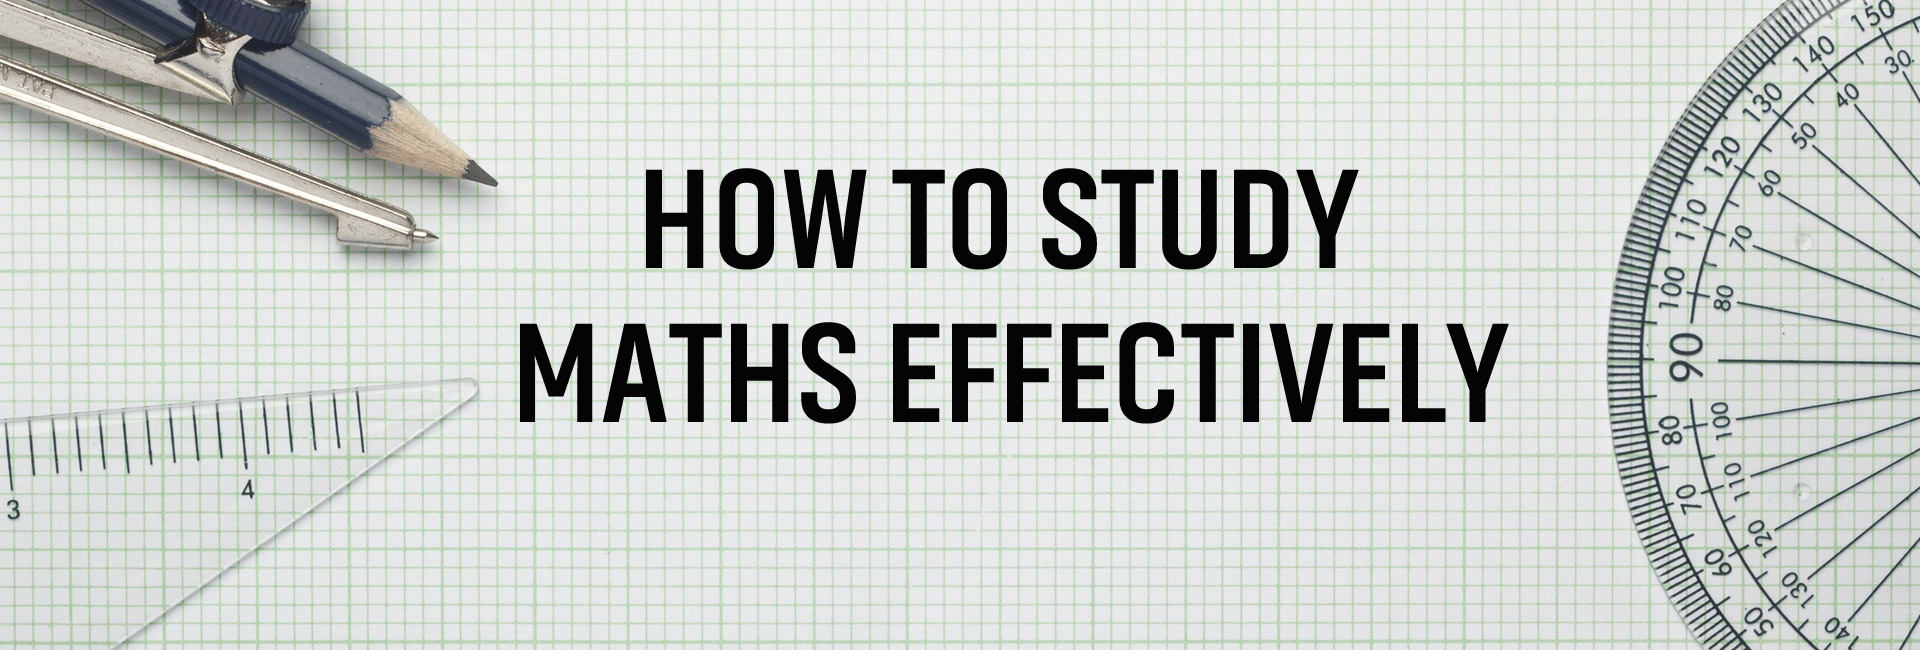 How to Study Maths Effectively